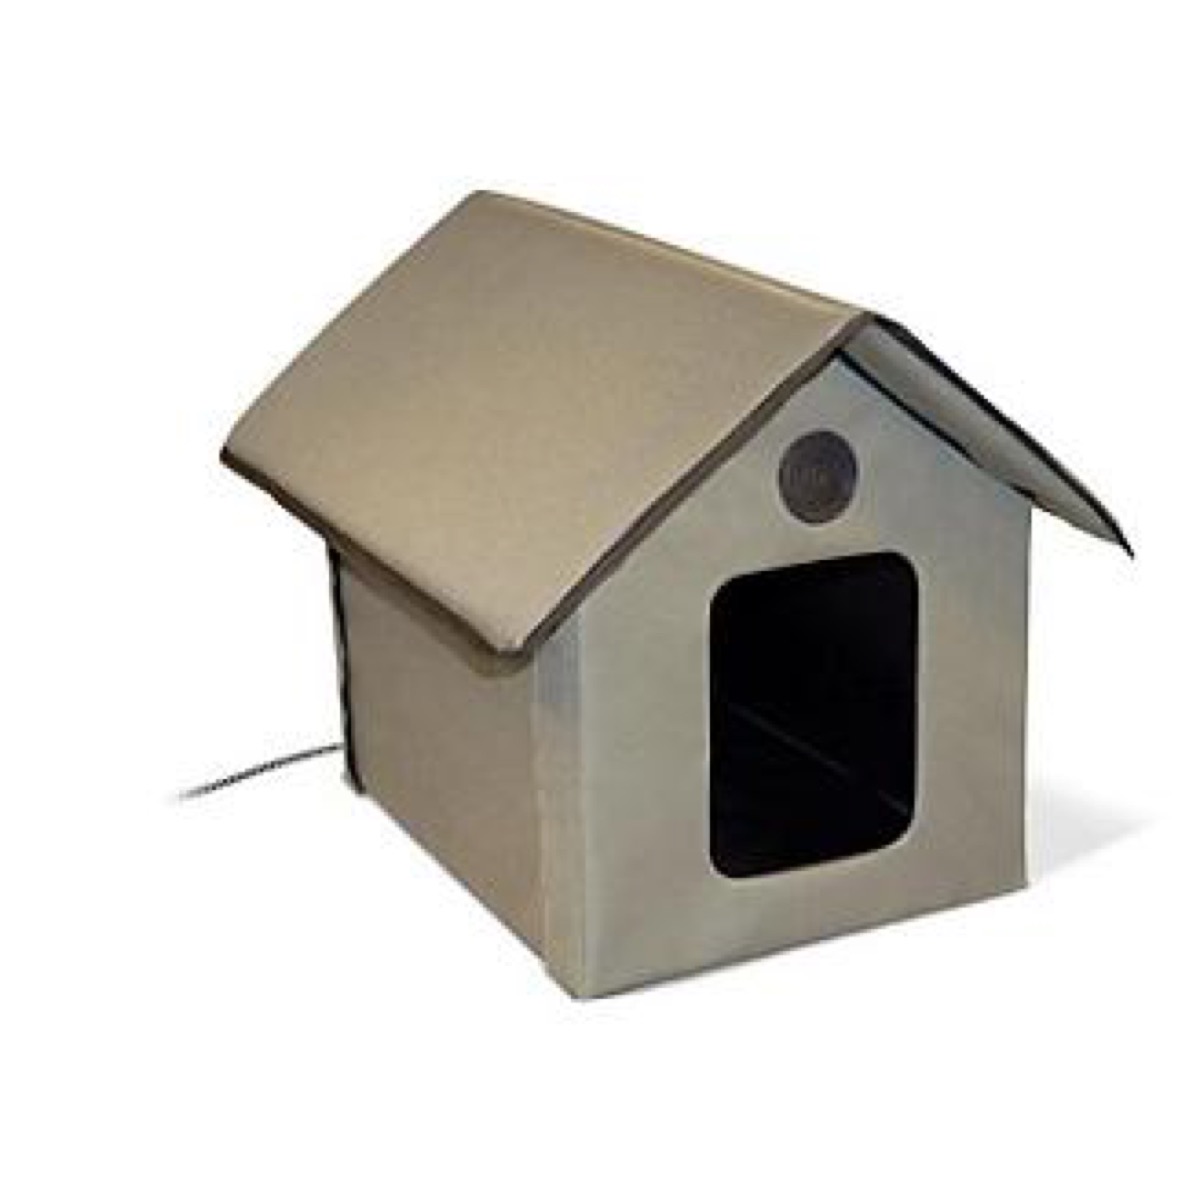 gray cat house with electrical cord coming out the back, cat playground